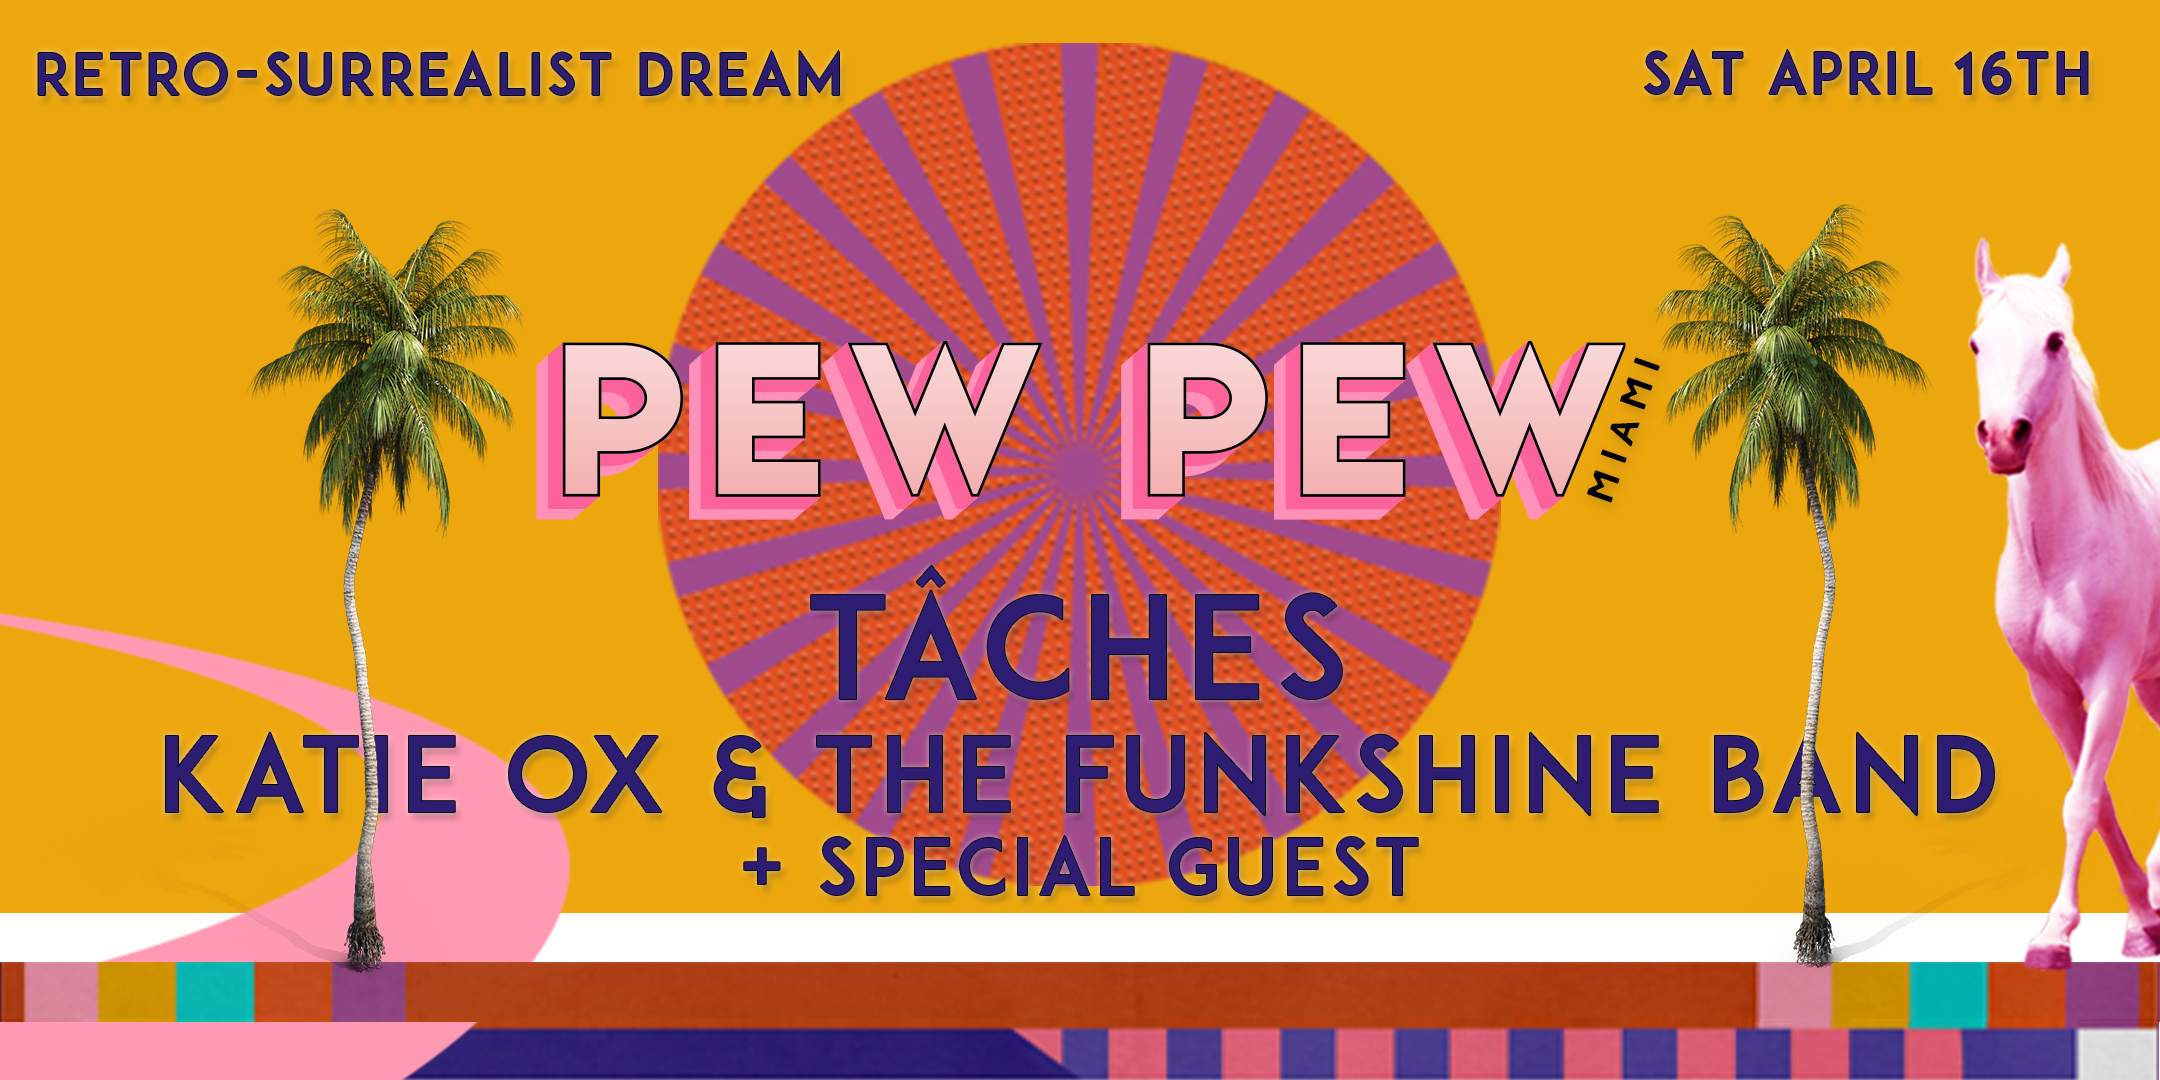 Pew Pew Miami Feat. Tâches, Katie Ox & The Funkshine Band + special guest - Página frontal